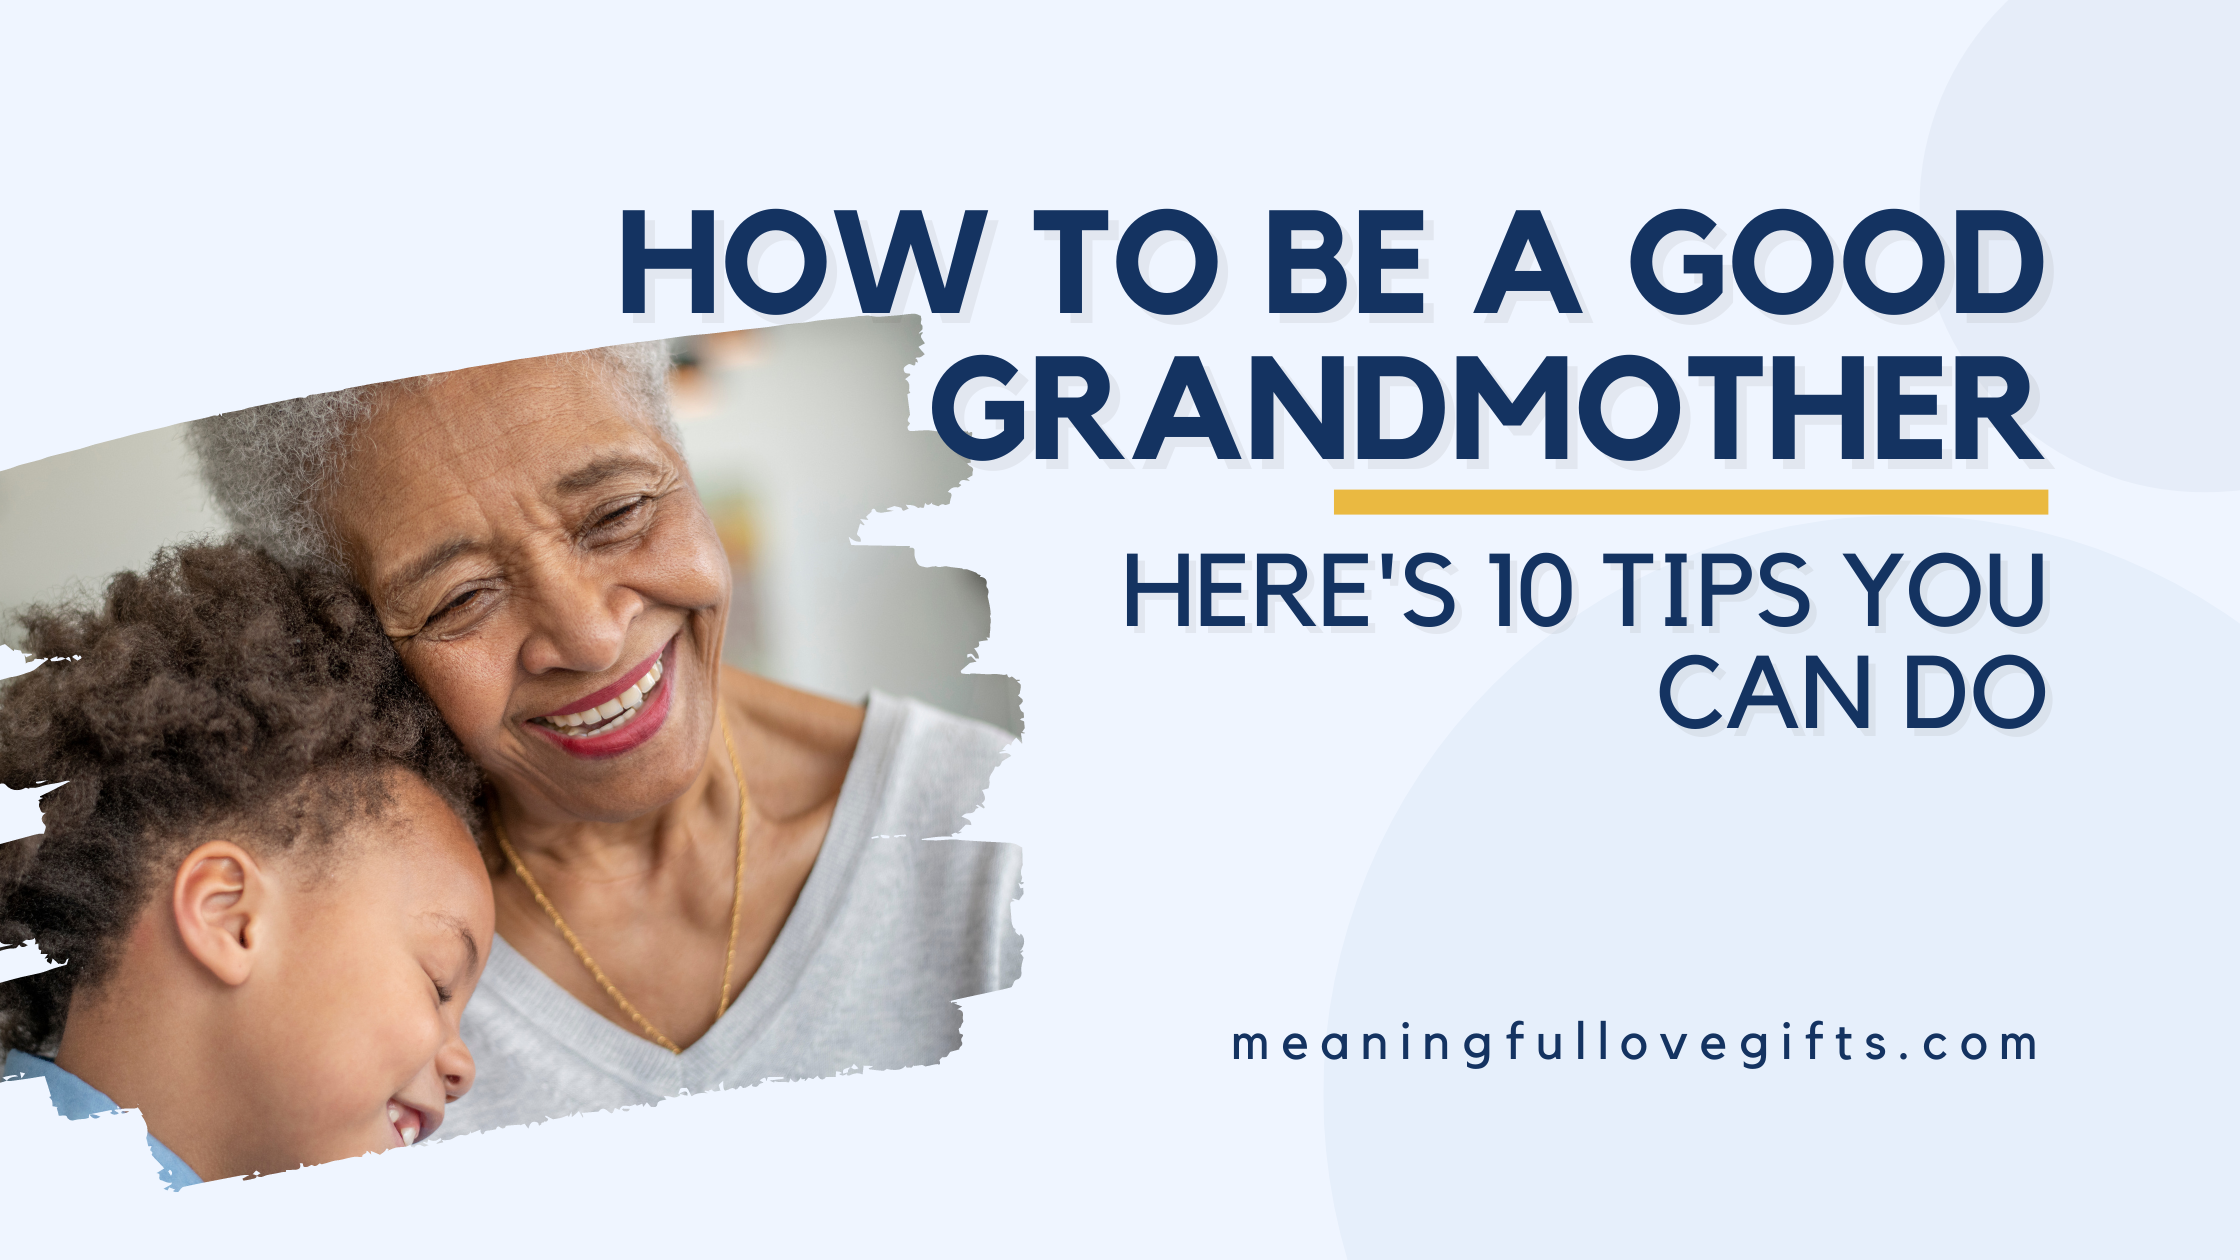 How to Be a Good Grandmother| Here Are 10 Things You Can Do